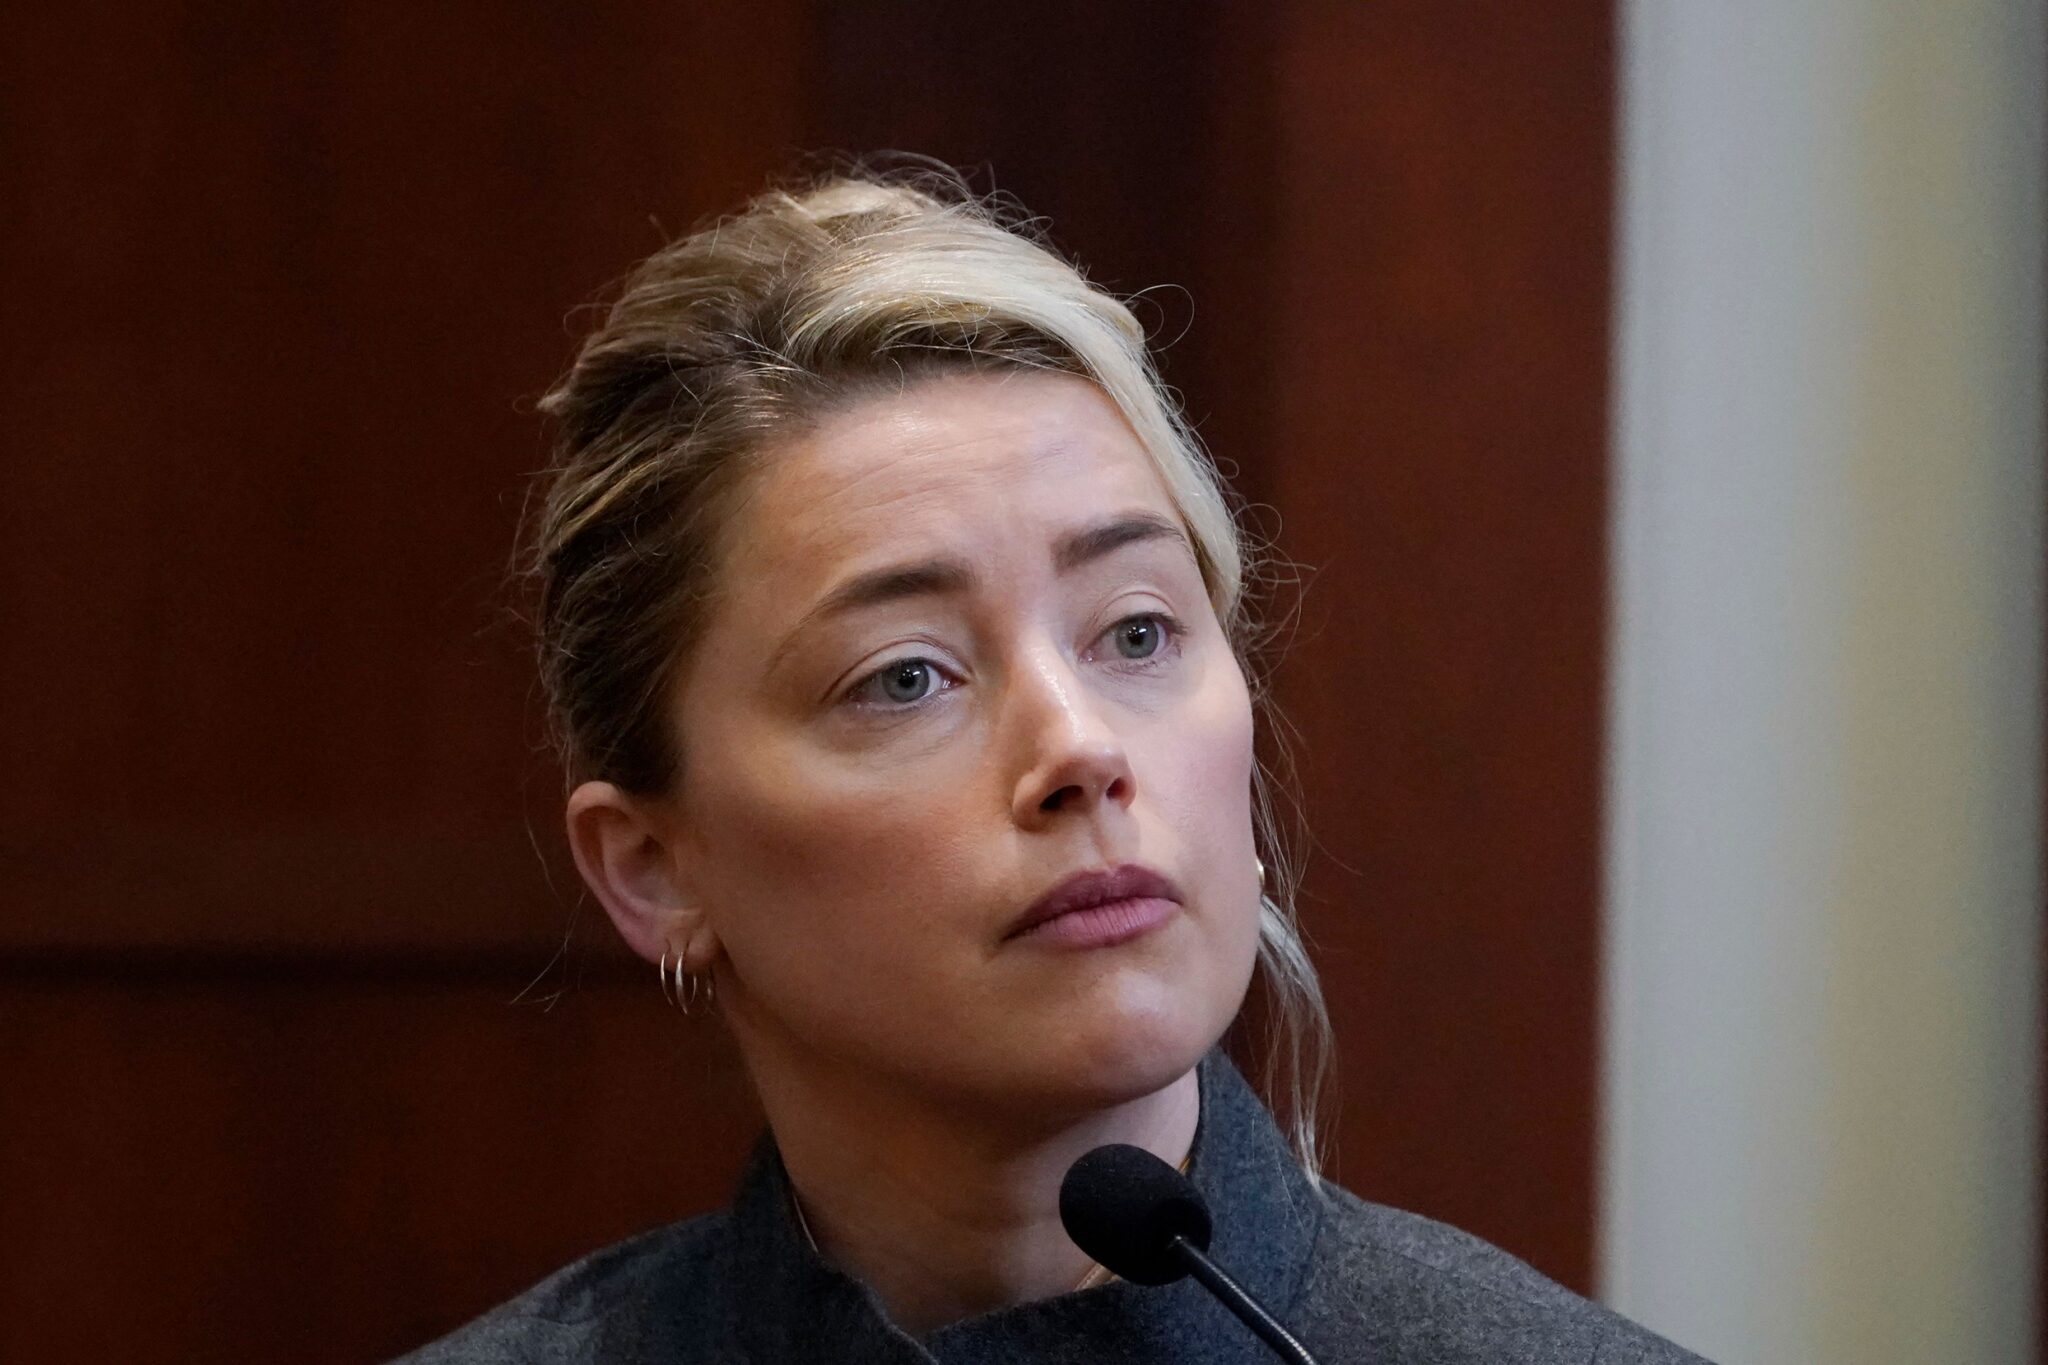 Amber Heard testifies in court at defamation trial against ex-husband Johnny Depp